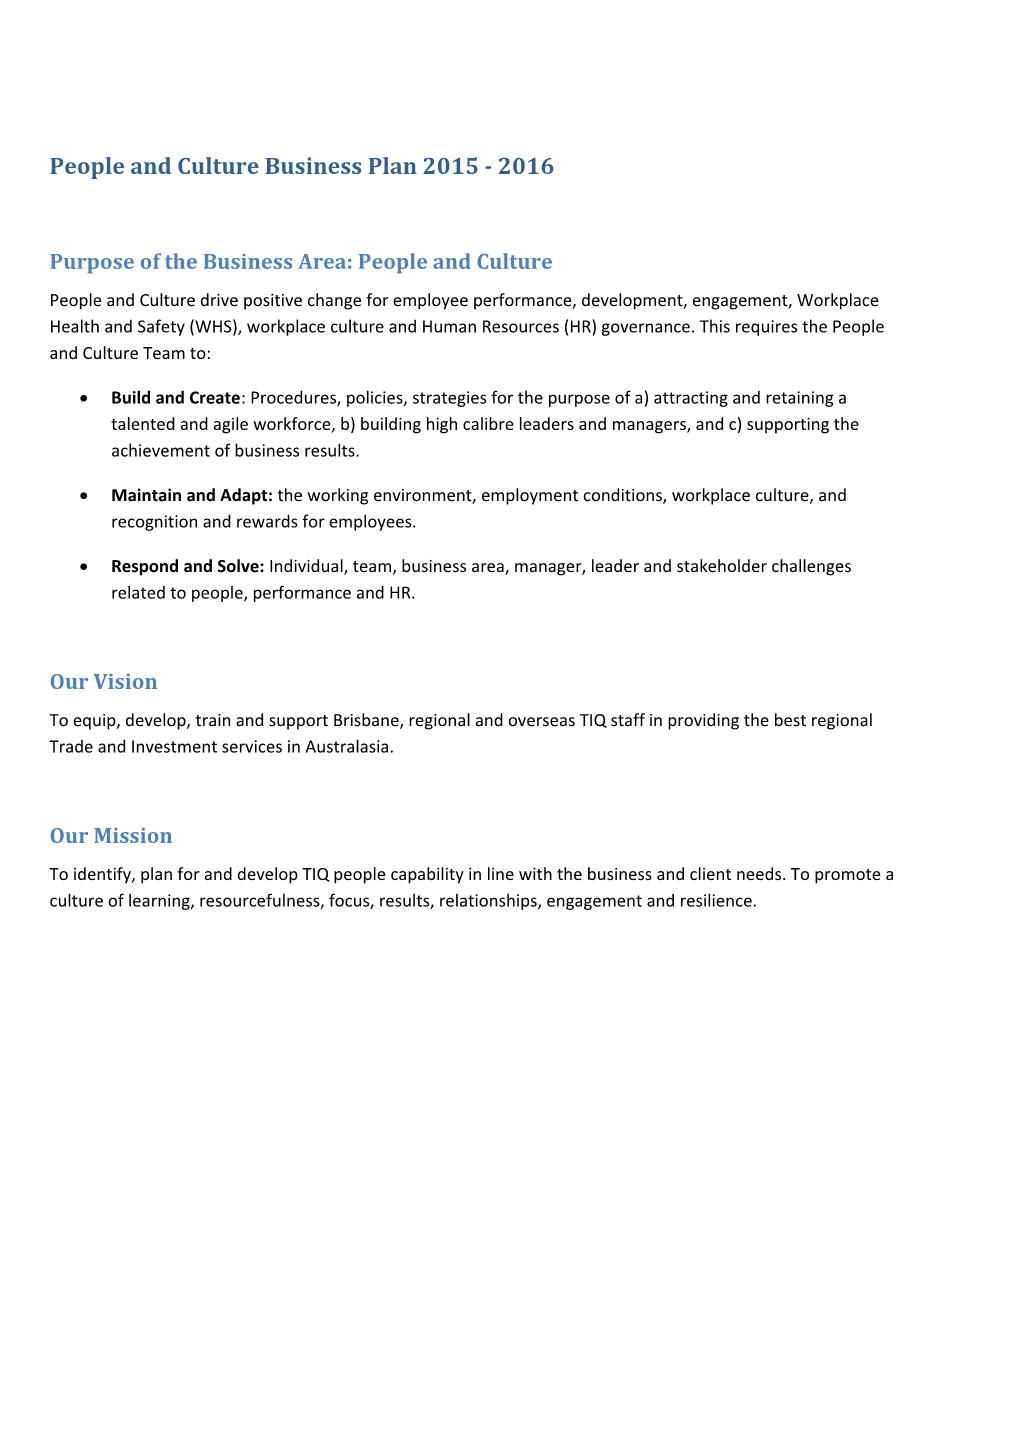 People and Culture Business Plan 2015 - 2016